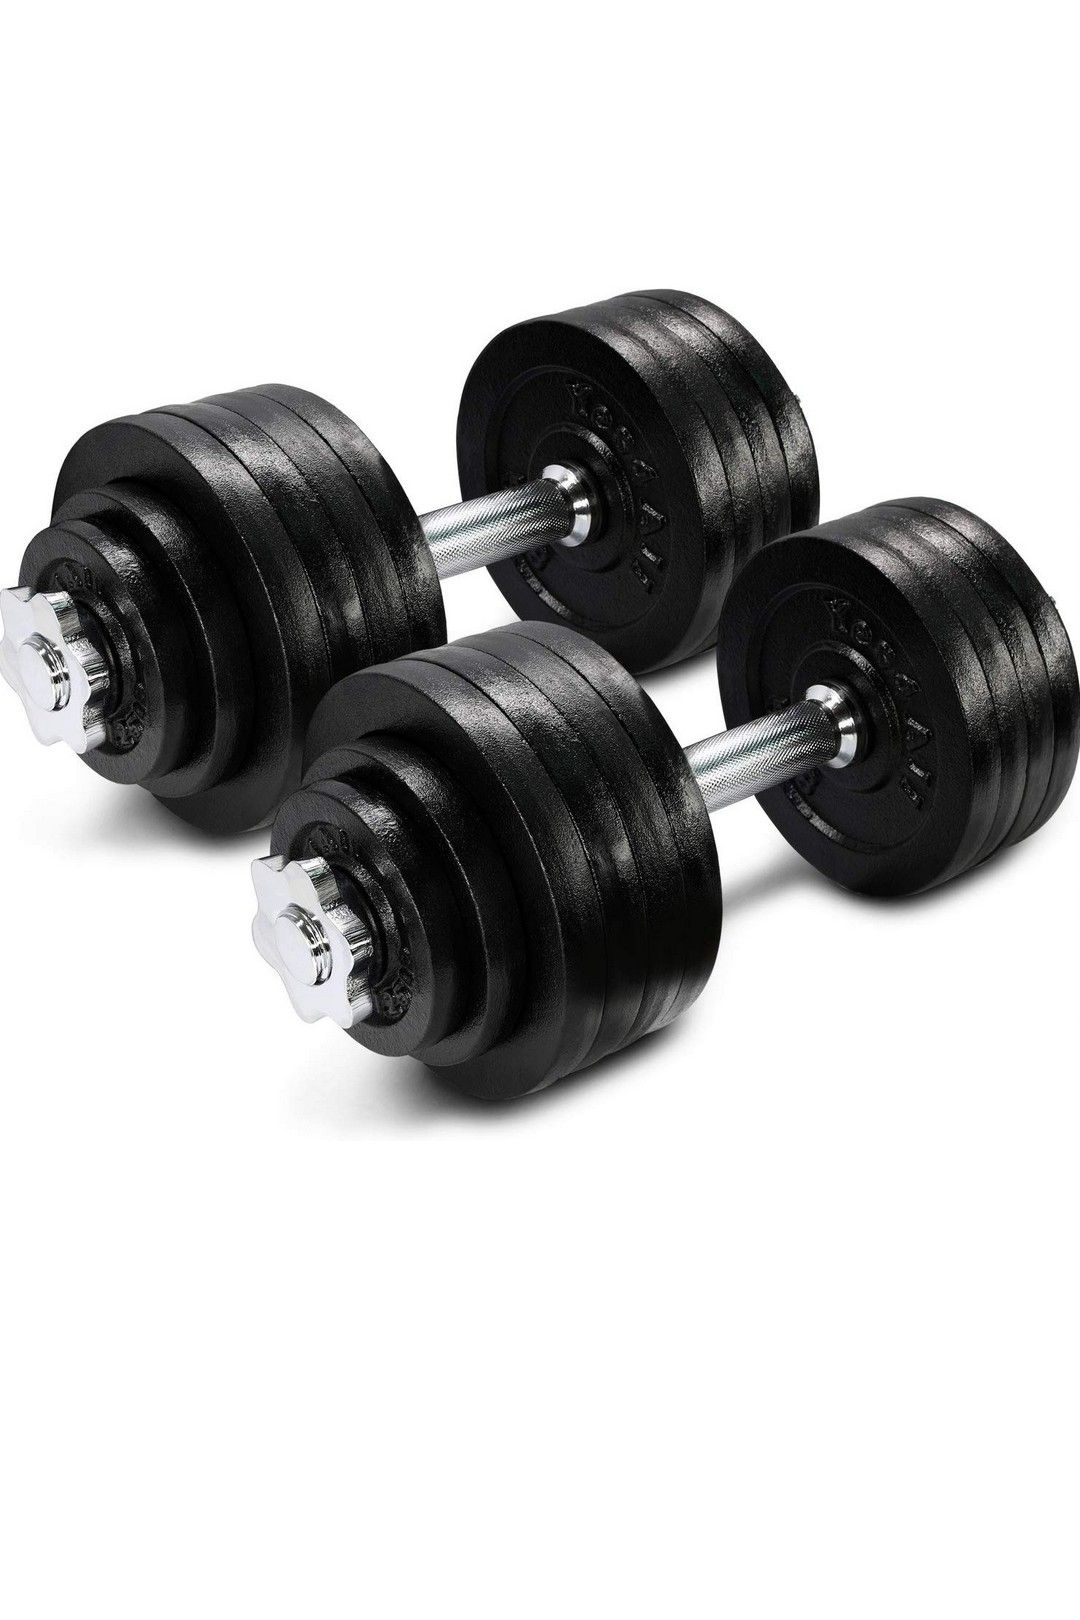 Yes4All Adjustable Dumbbells 52.5 Lbs per dumbbell